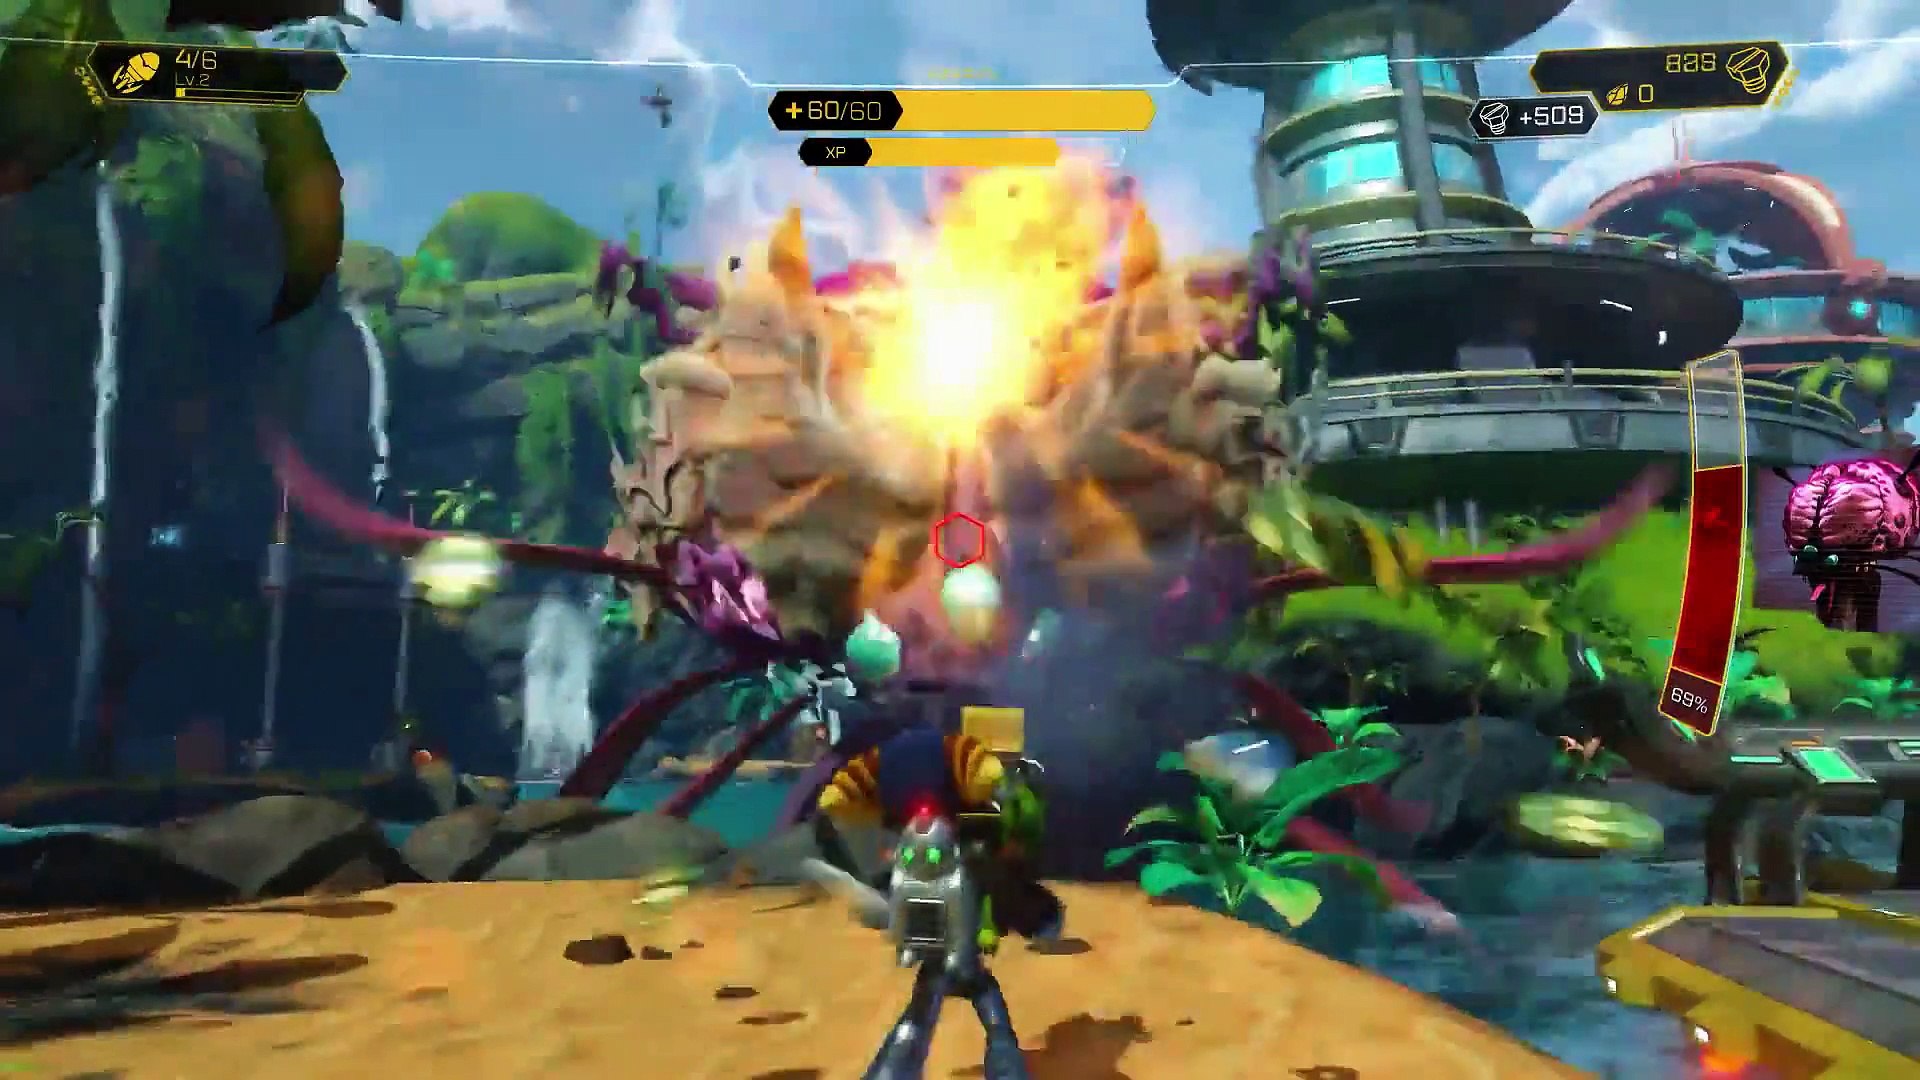 Watch new footage of Ratchet & Clank PS4